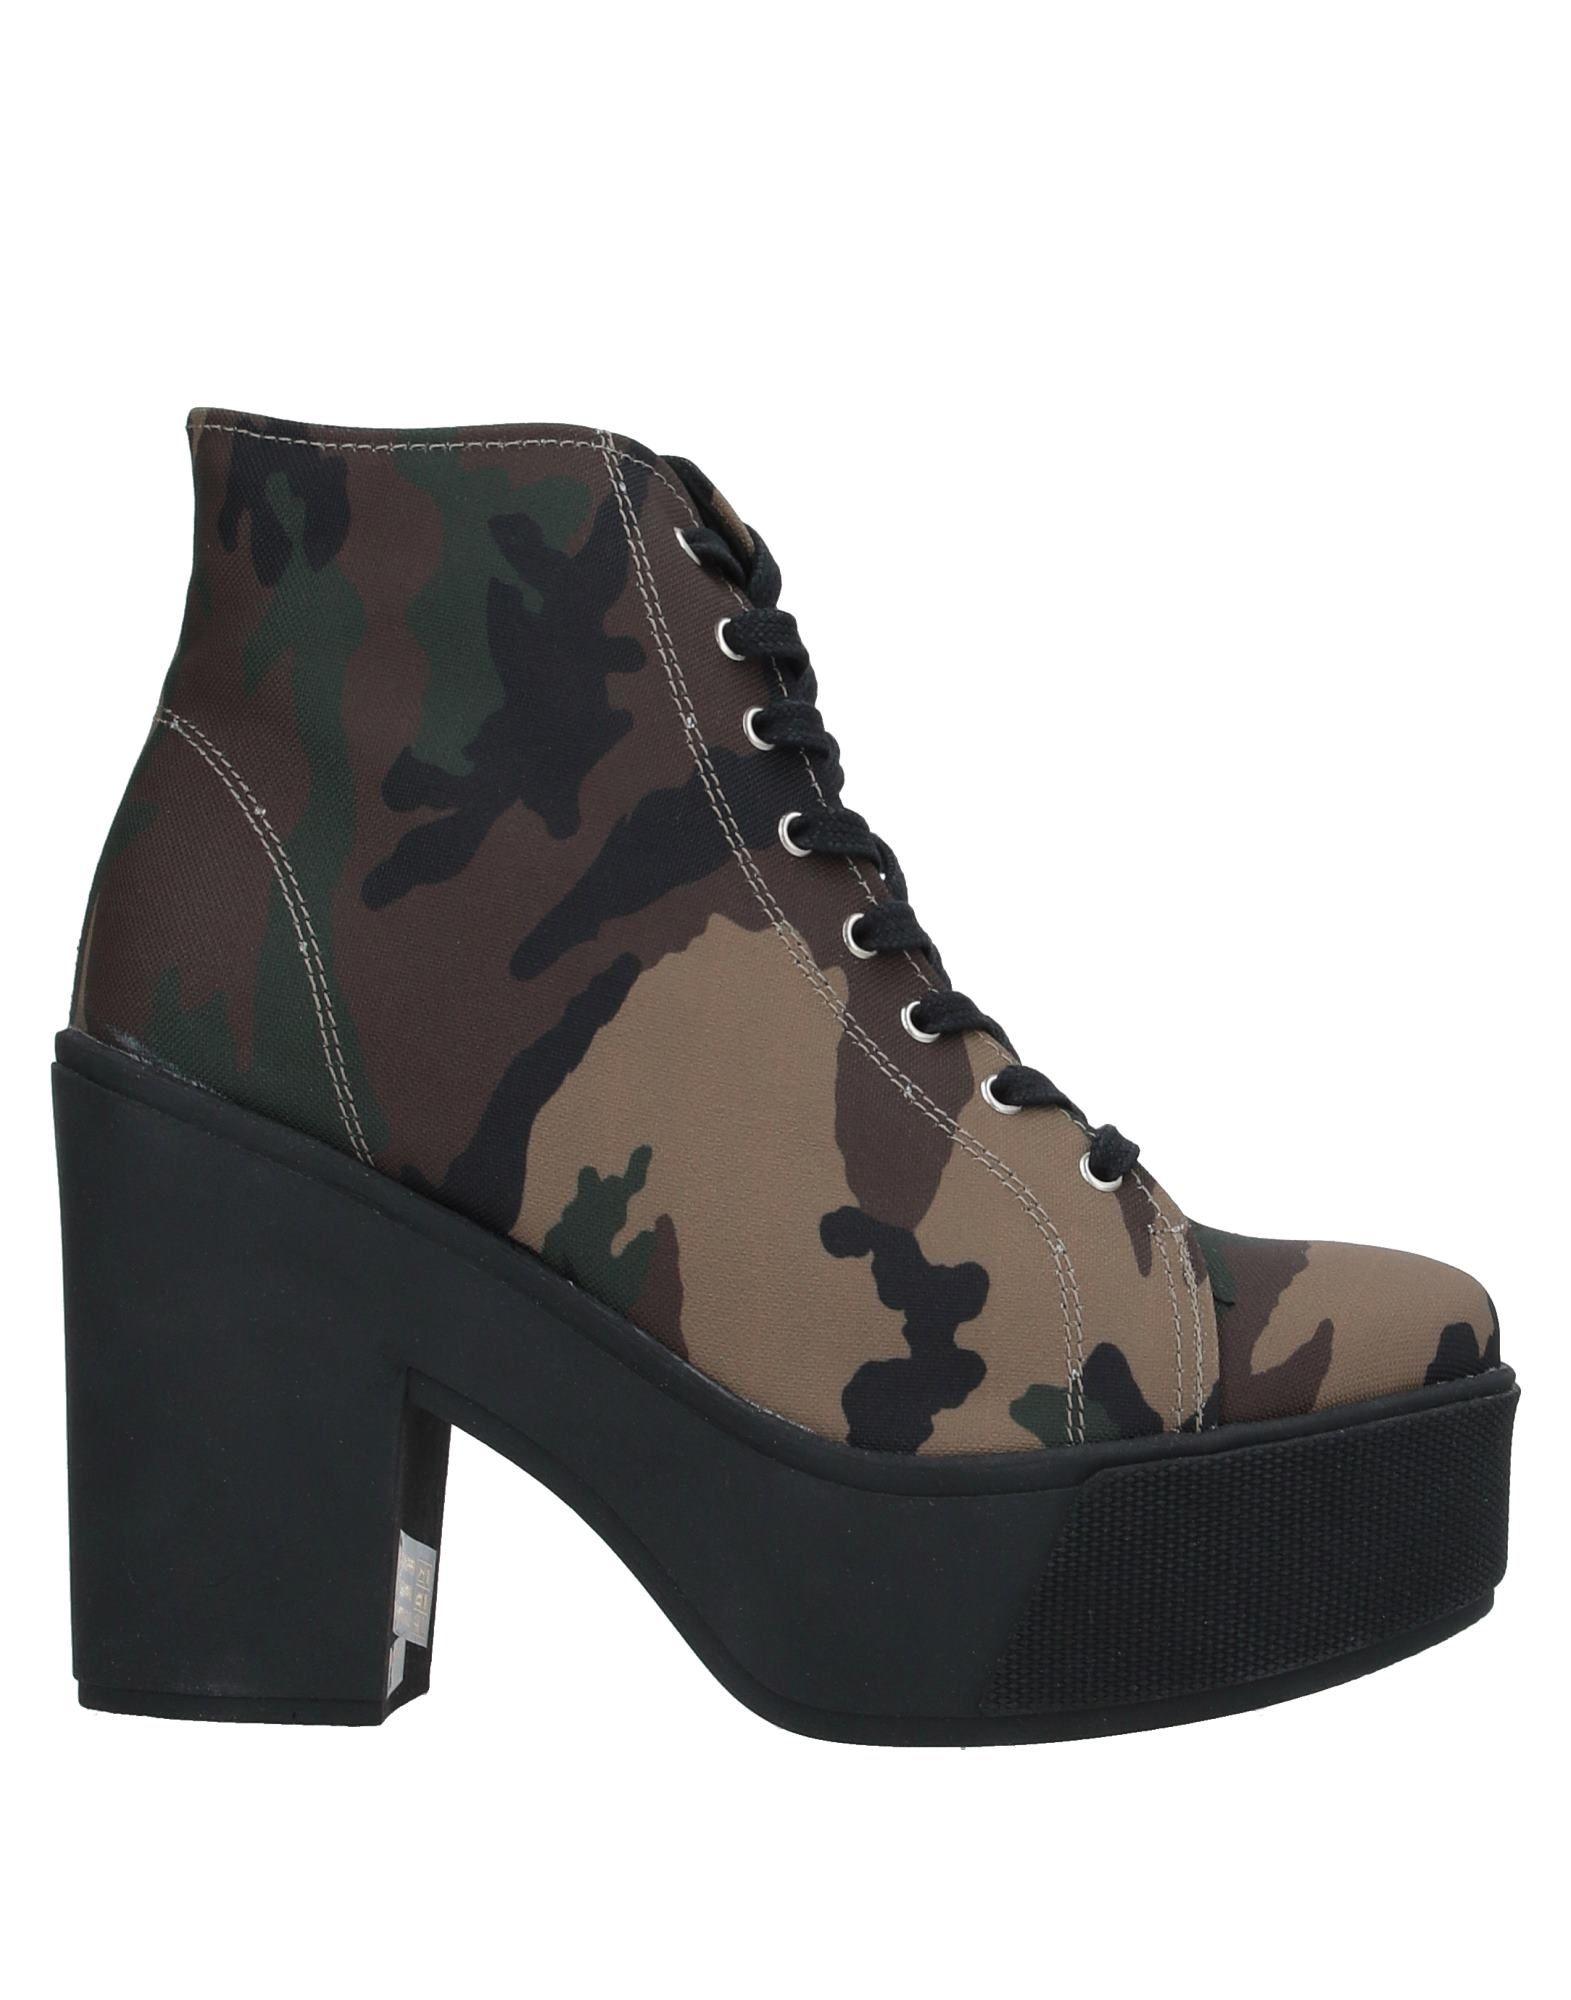 Sixtyseven Canvas Ankle Boots in Khaki (Black) - Lyst